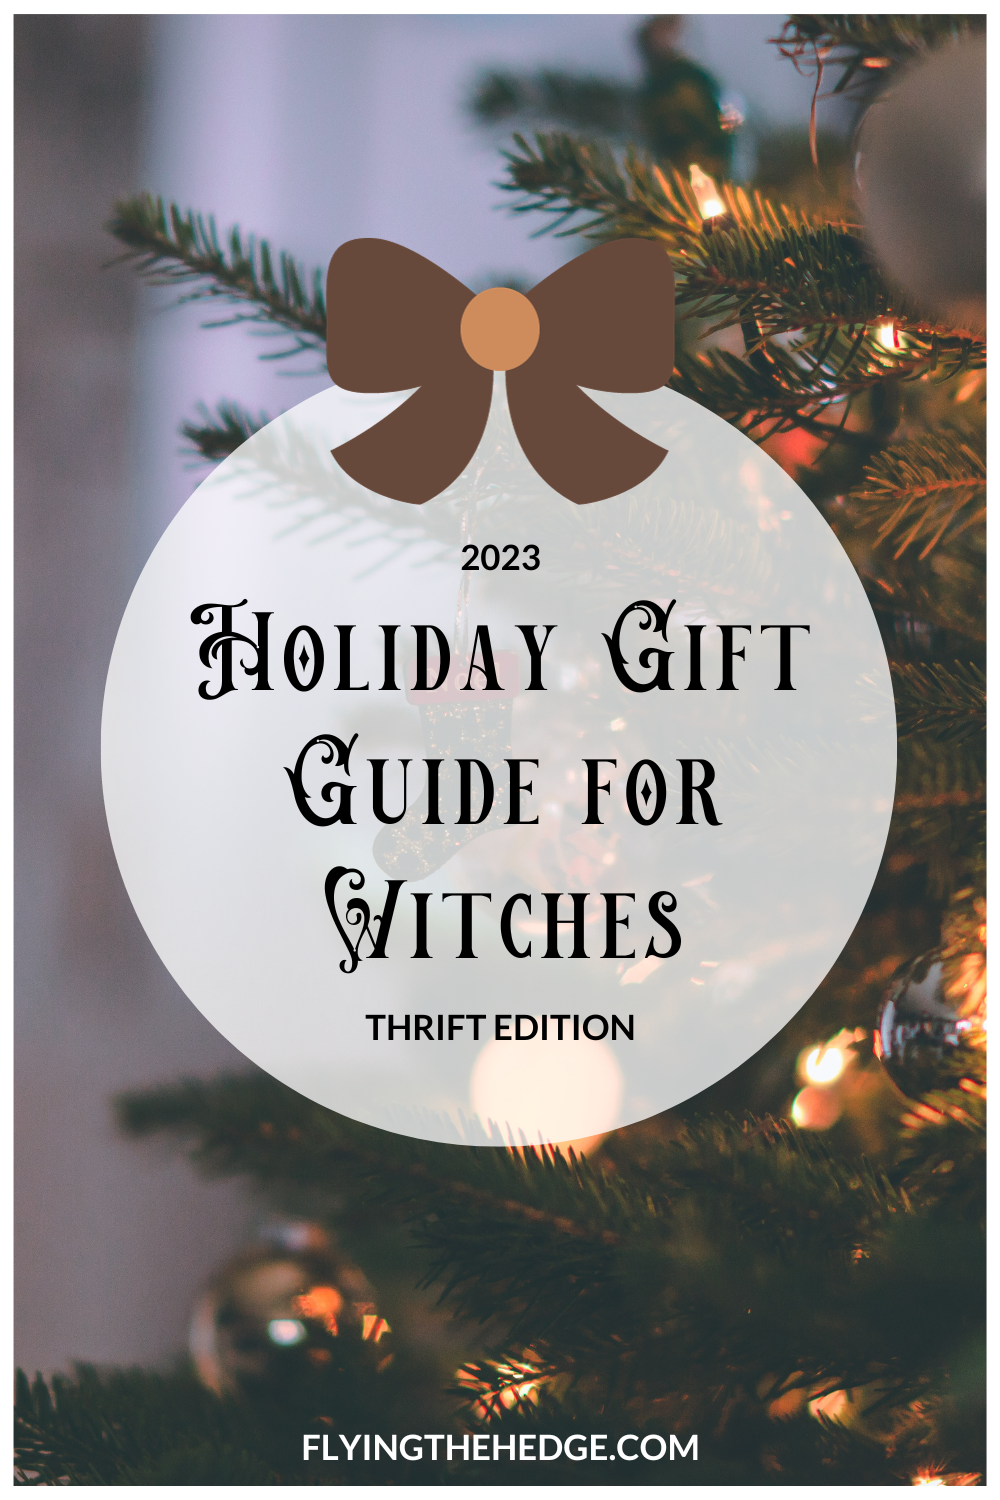 holiday, gift guide, witches, Yule, witchcraft, pagan, neopagan, wicca, wiccan, occult, witchy